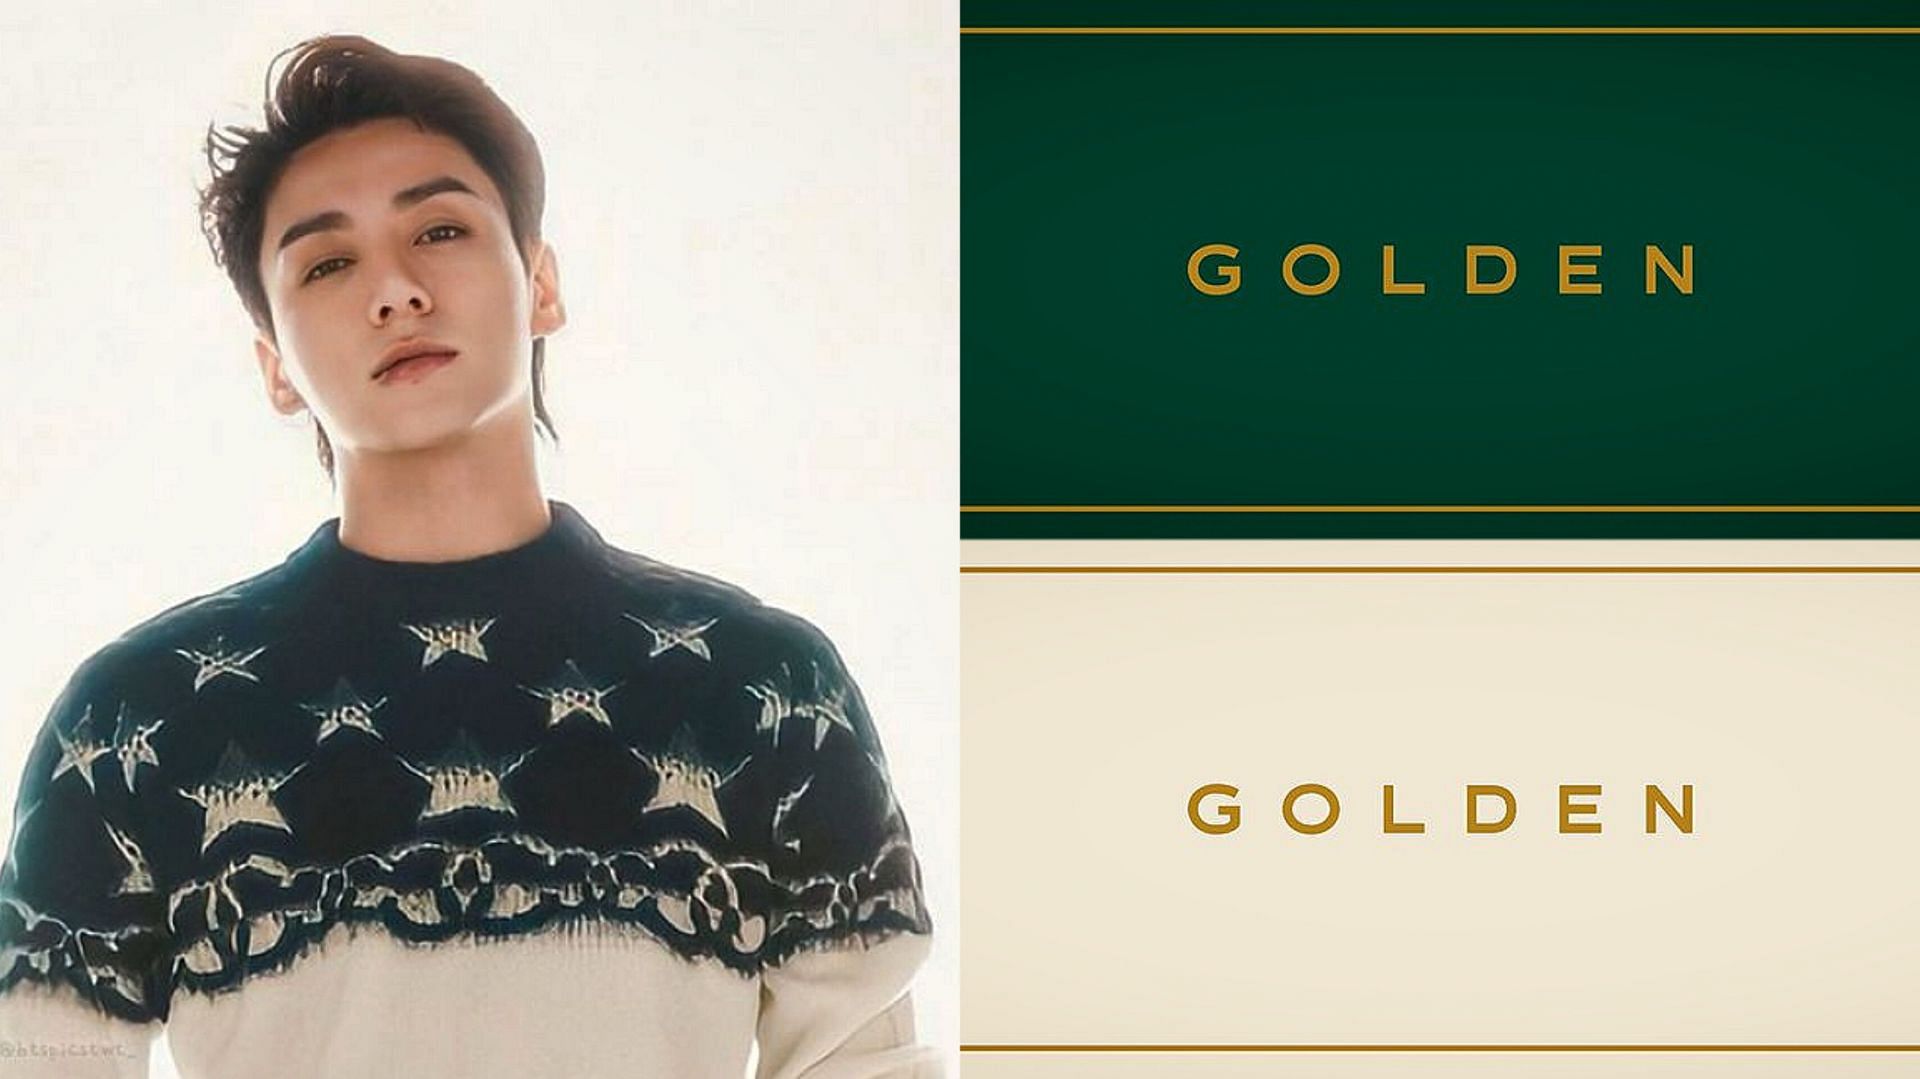 HE'S GONNA BREAK THE MUSIC INDUSTRY: Fans rejoice as Jungkook is set to  release his first solo album 'GOLDEN,' featuring 11 tracks